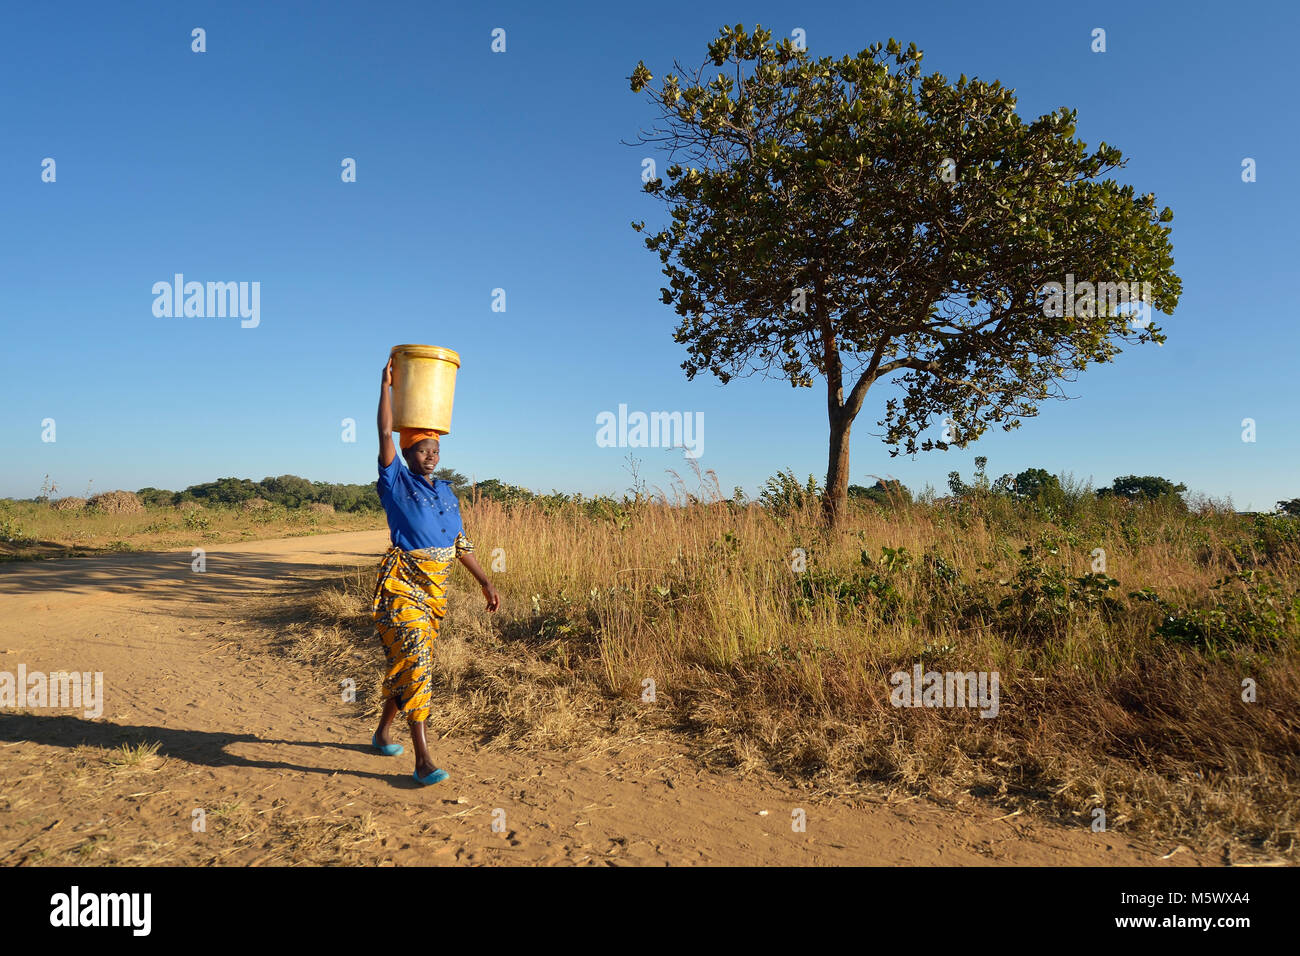 Frances Mtonga carries water from a community well to her home in Chibamu Jere, Malawi. Stock Photo